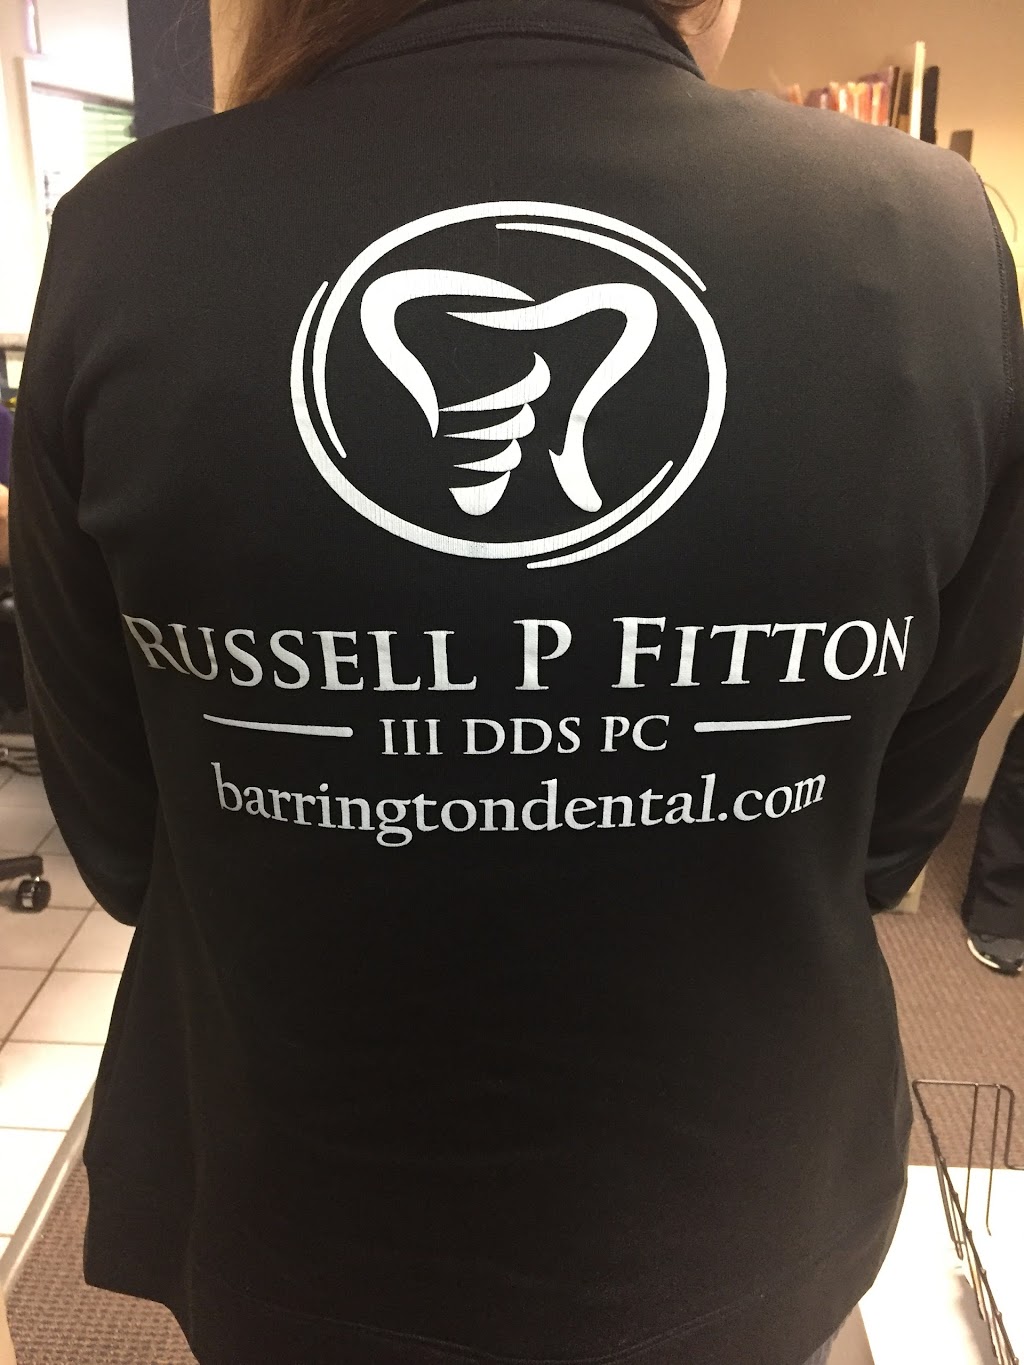 Barrington Dental - Drs. Russell P. Fitton III and IV, DDS | 820 S Northwest Hwy, Barrington, IL 60010 | Phone: (847) 381-3927